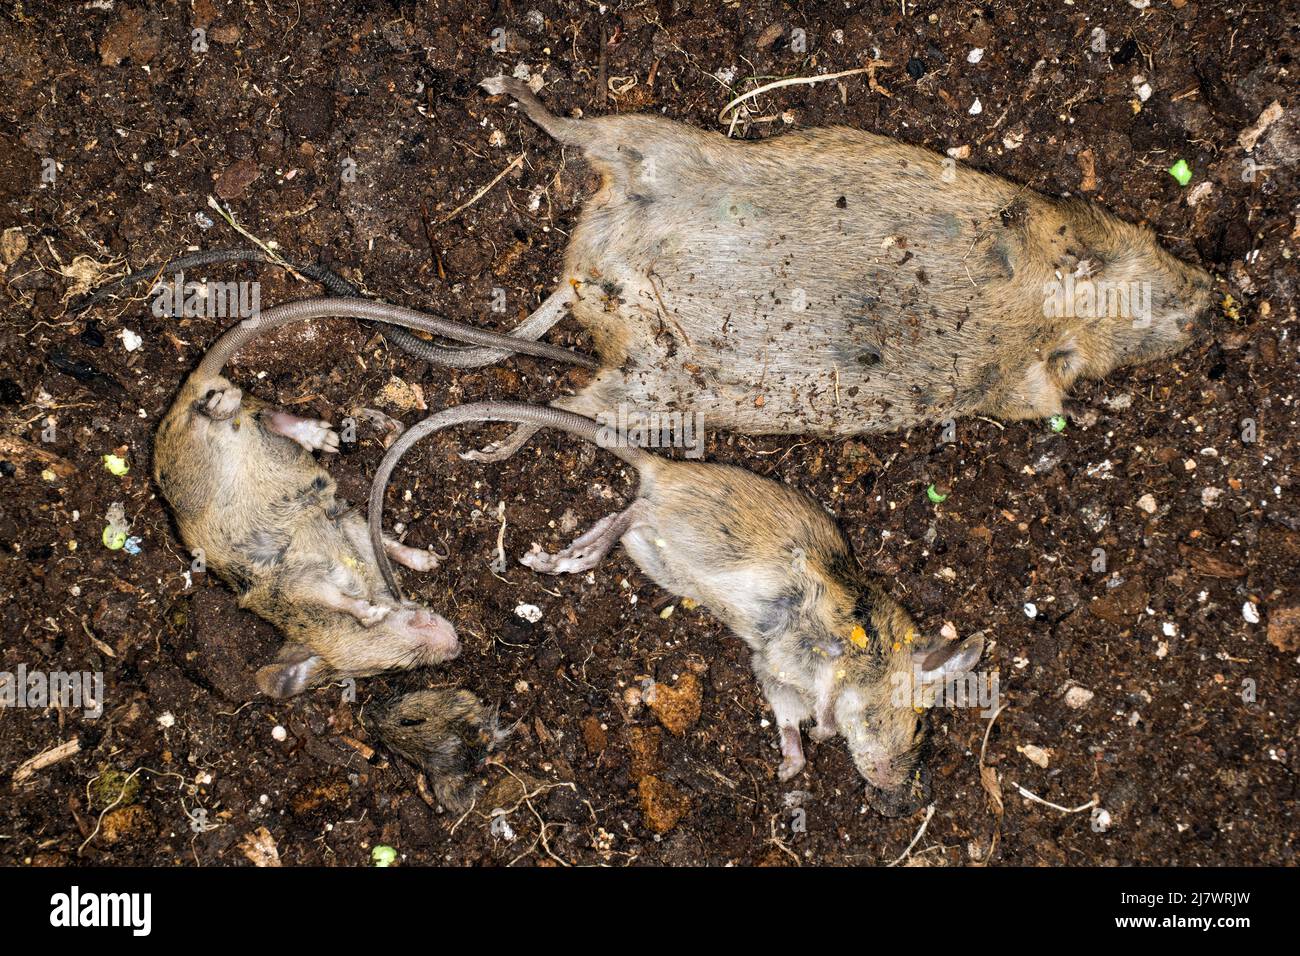 Dead house mice after pest controller Stock Photo